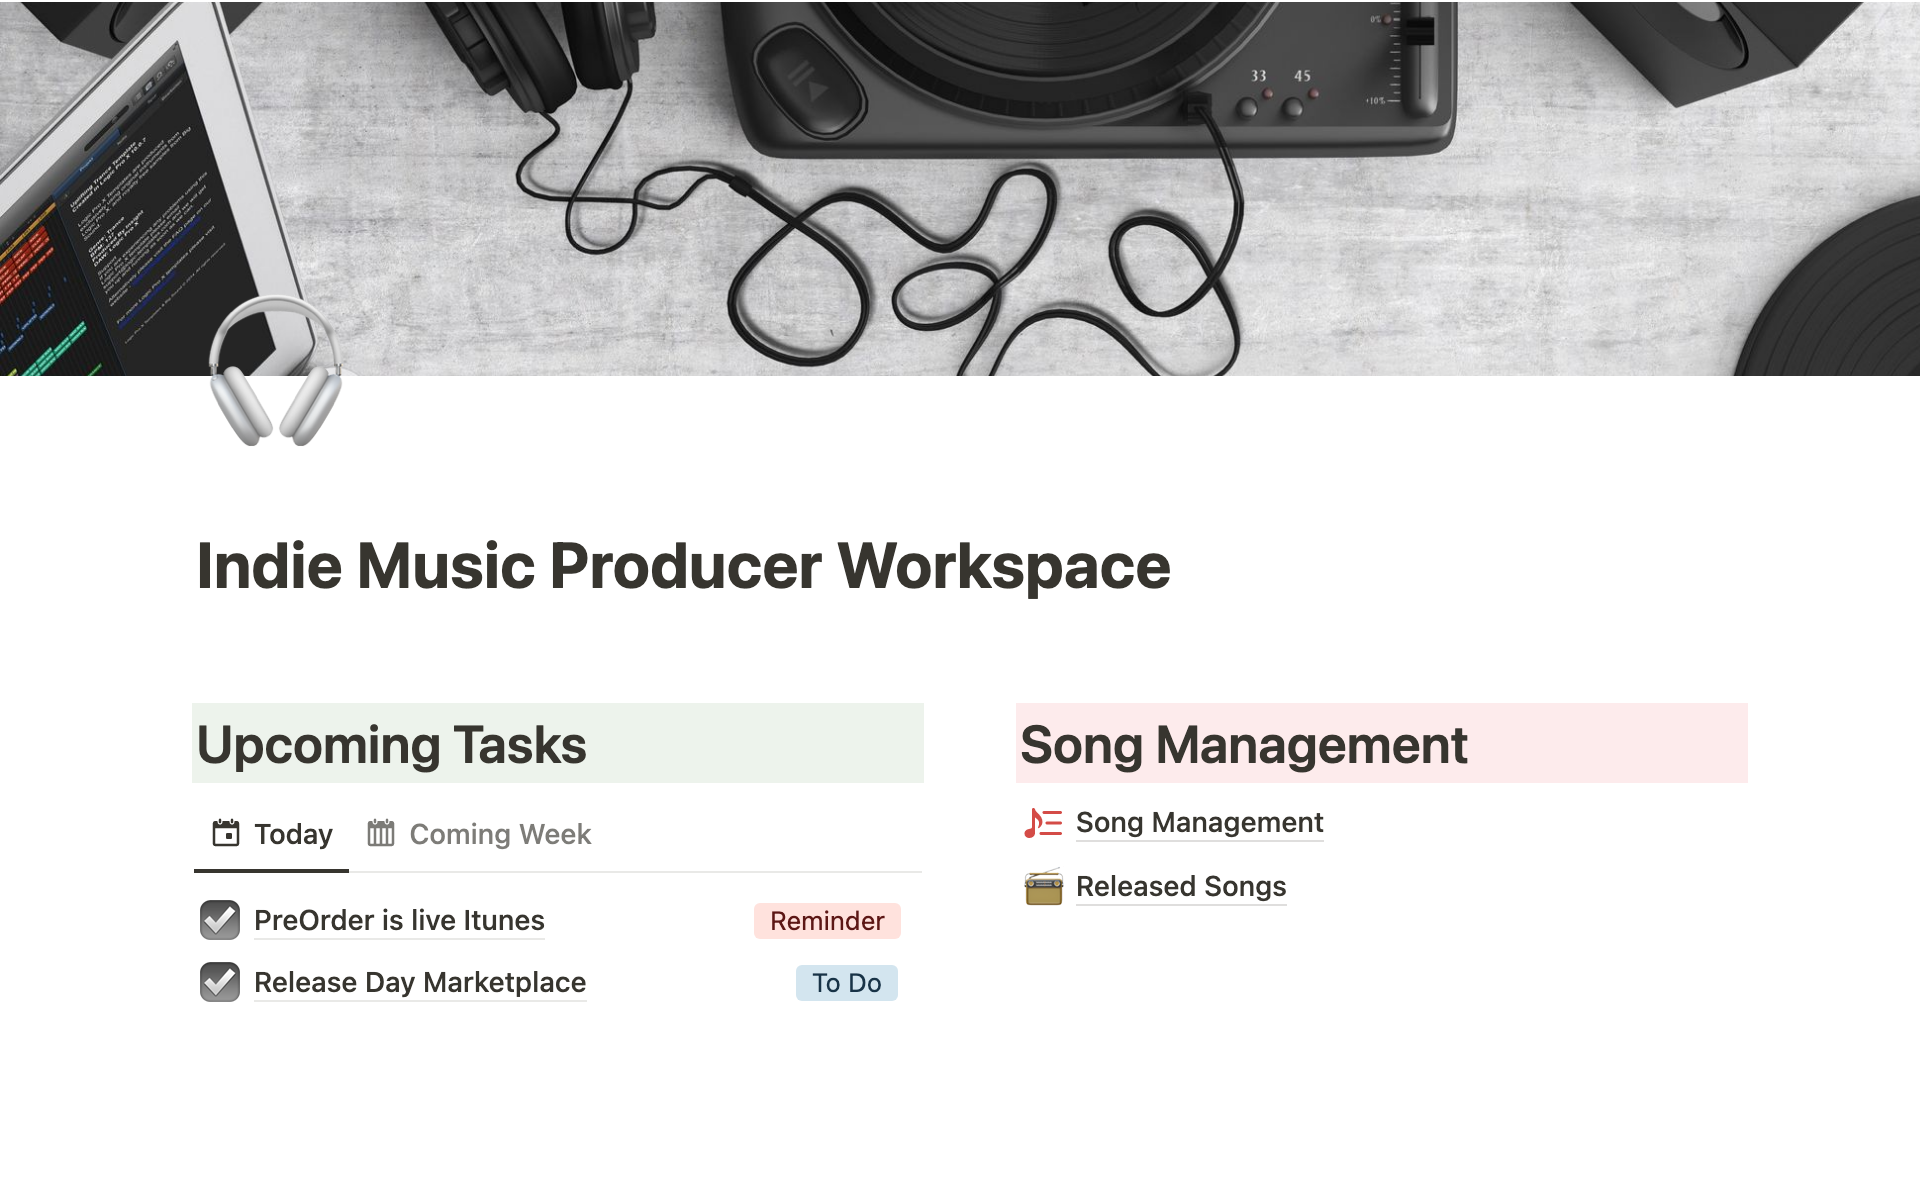 Helps Indie Music Producers to manage their songs, social media content, and keep track of their contacts, collaborators and tasks. In addition to other extra features.